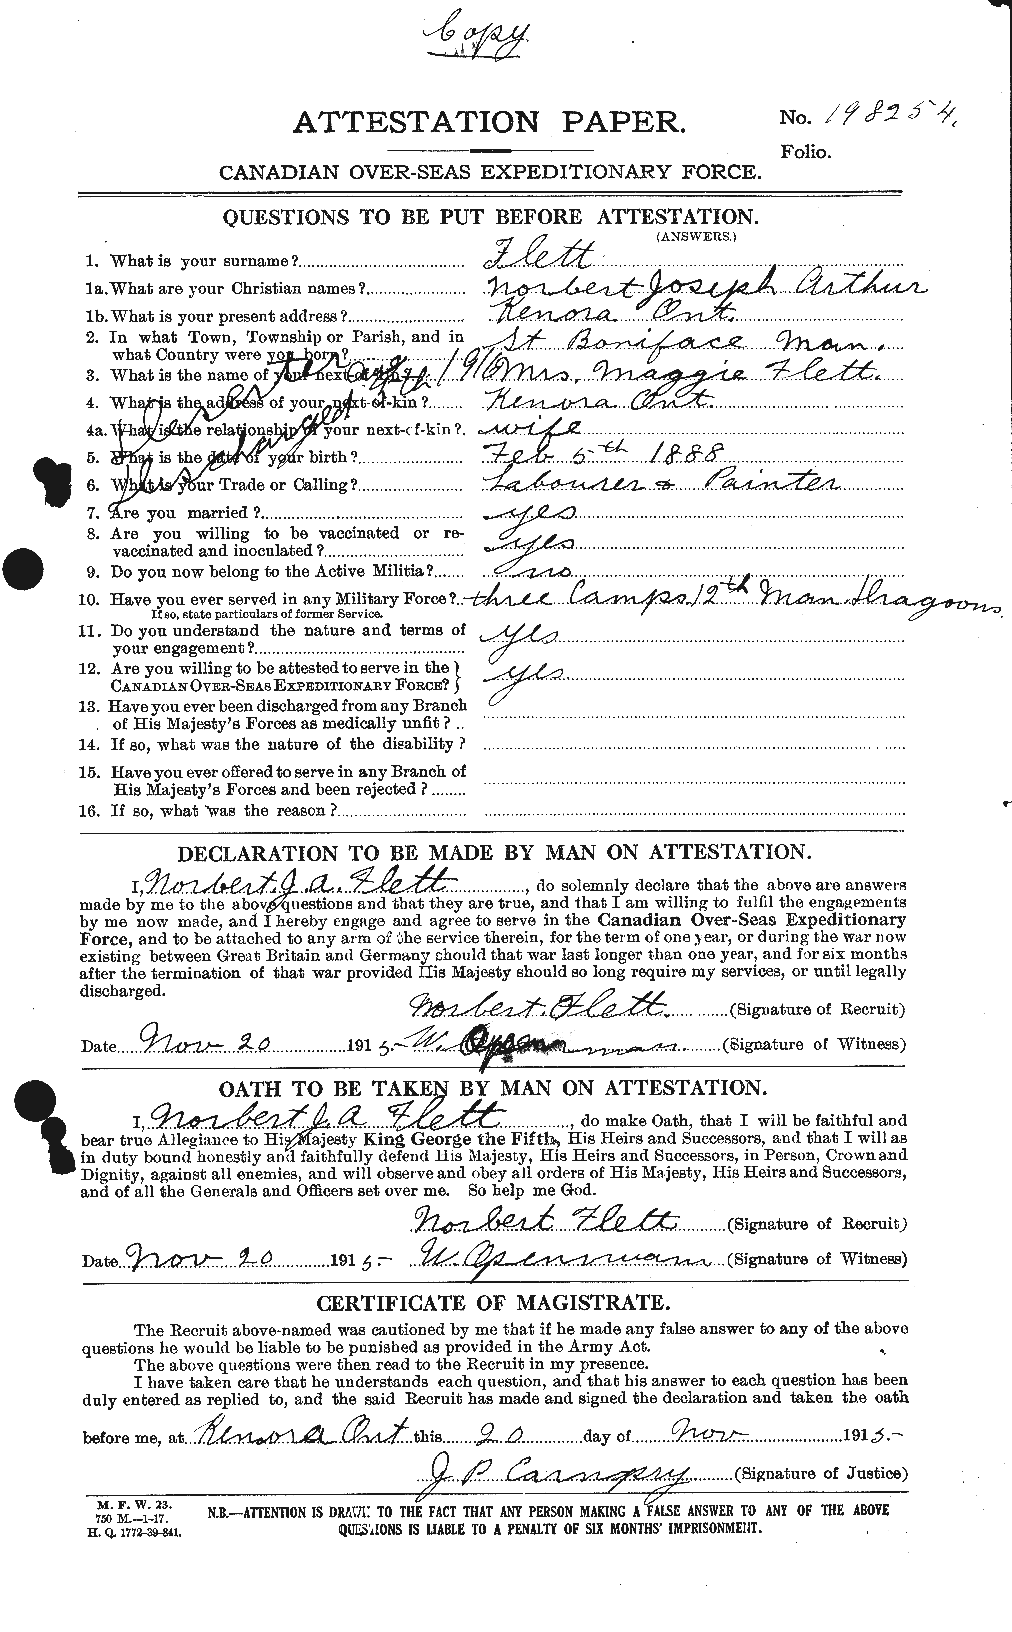 Personnel Records of the First World War - CEF 329798a